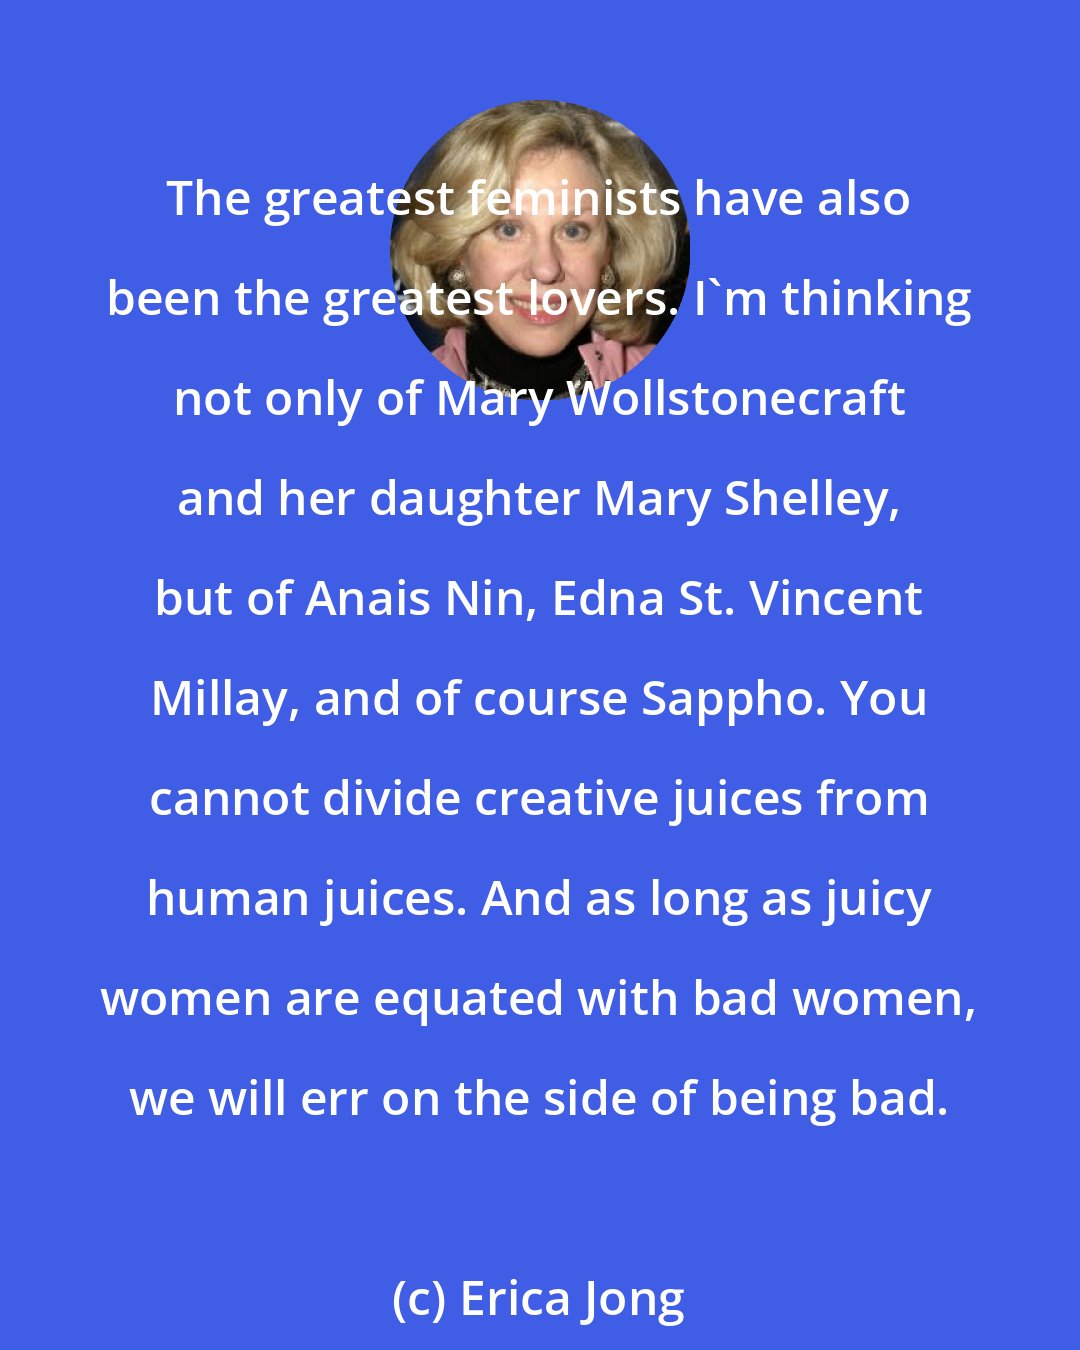 Erica Jong: The greatest feminists have also been the greatest lovers. I'm thinking not only of Mary Wollstonecraft and her daughter Mary Shelley, but of Anais Nin, Edna St. Vincent Millay, and of course Sappho. You cannot divide creative juices from human juices. And as long as juicy women are equated with bad women, we will err on the side of being bad.